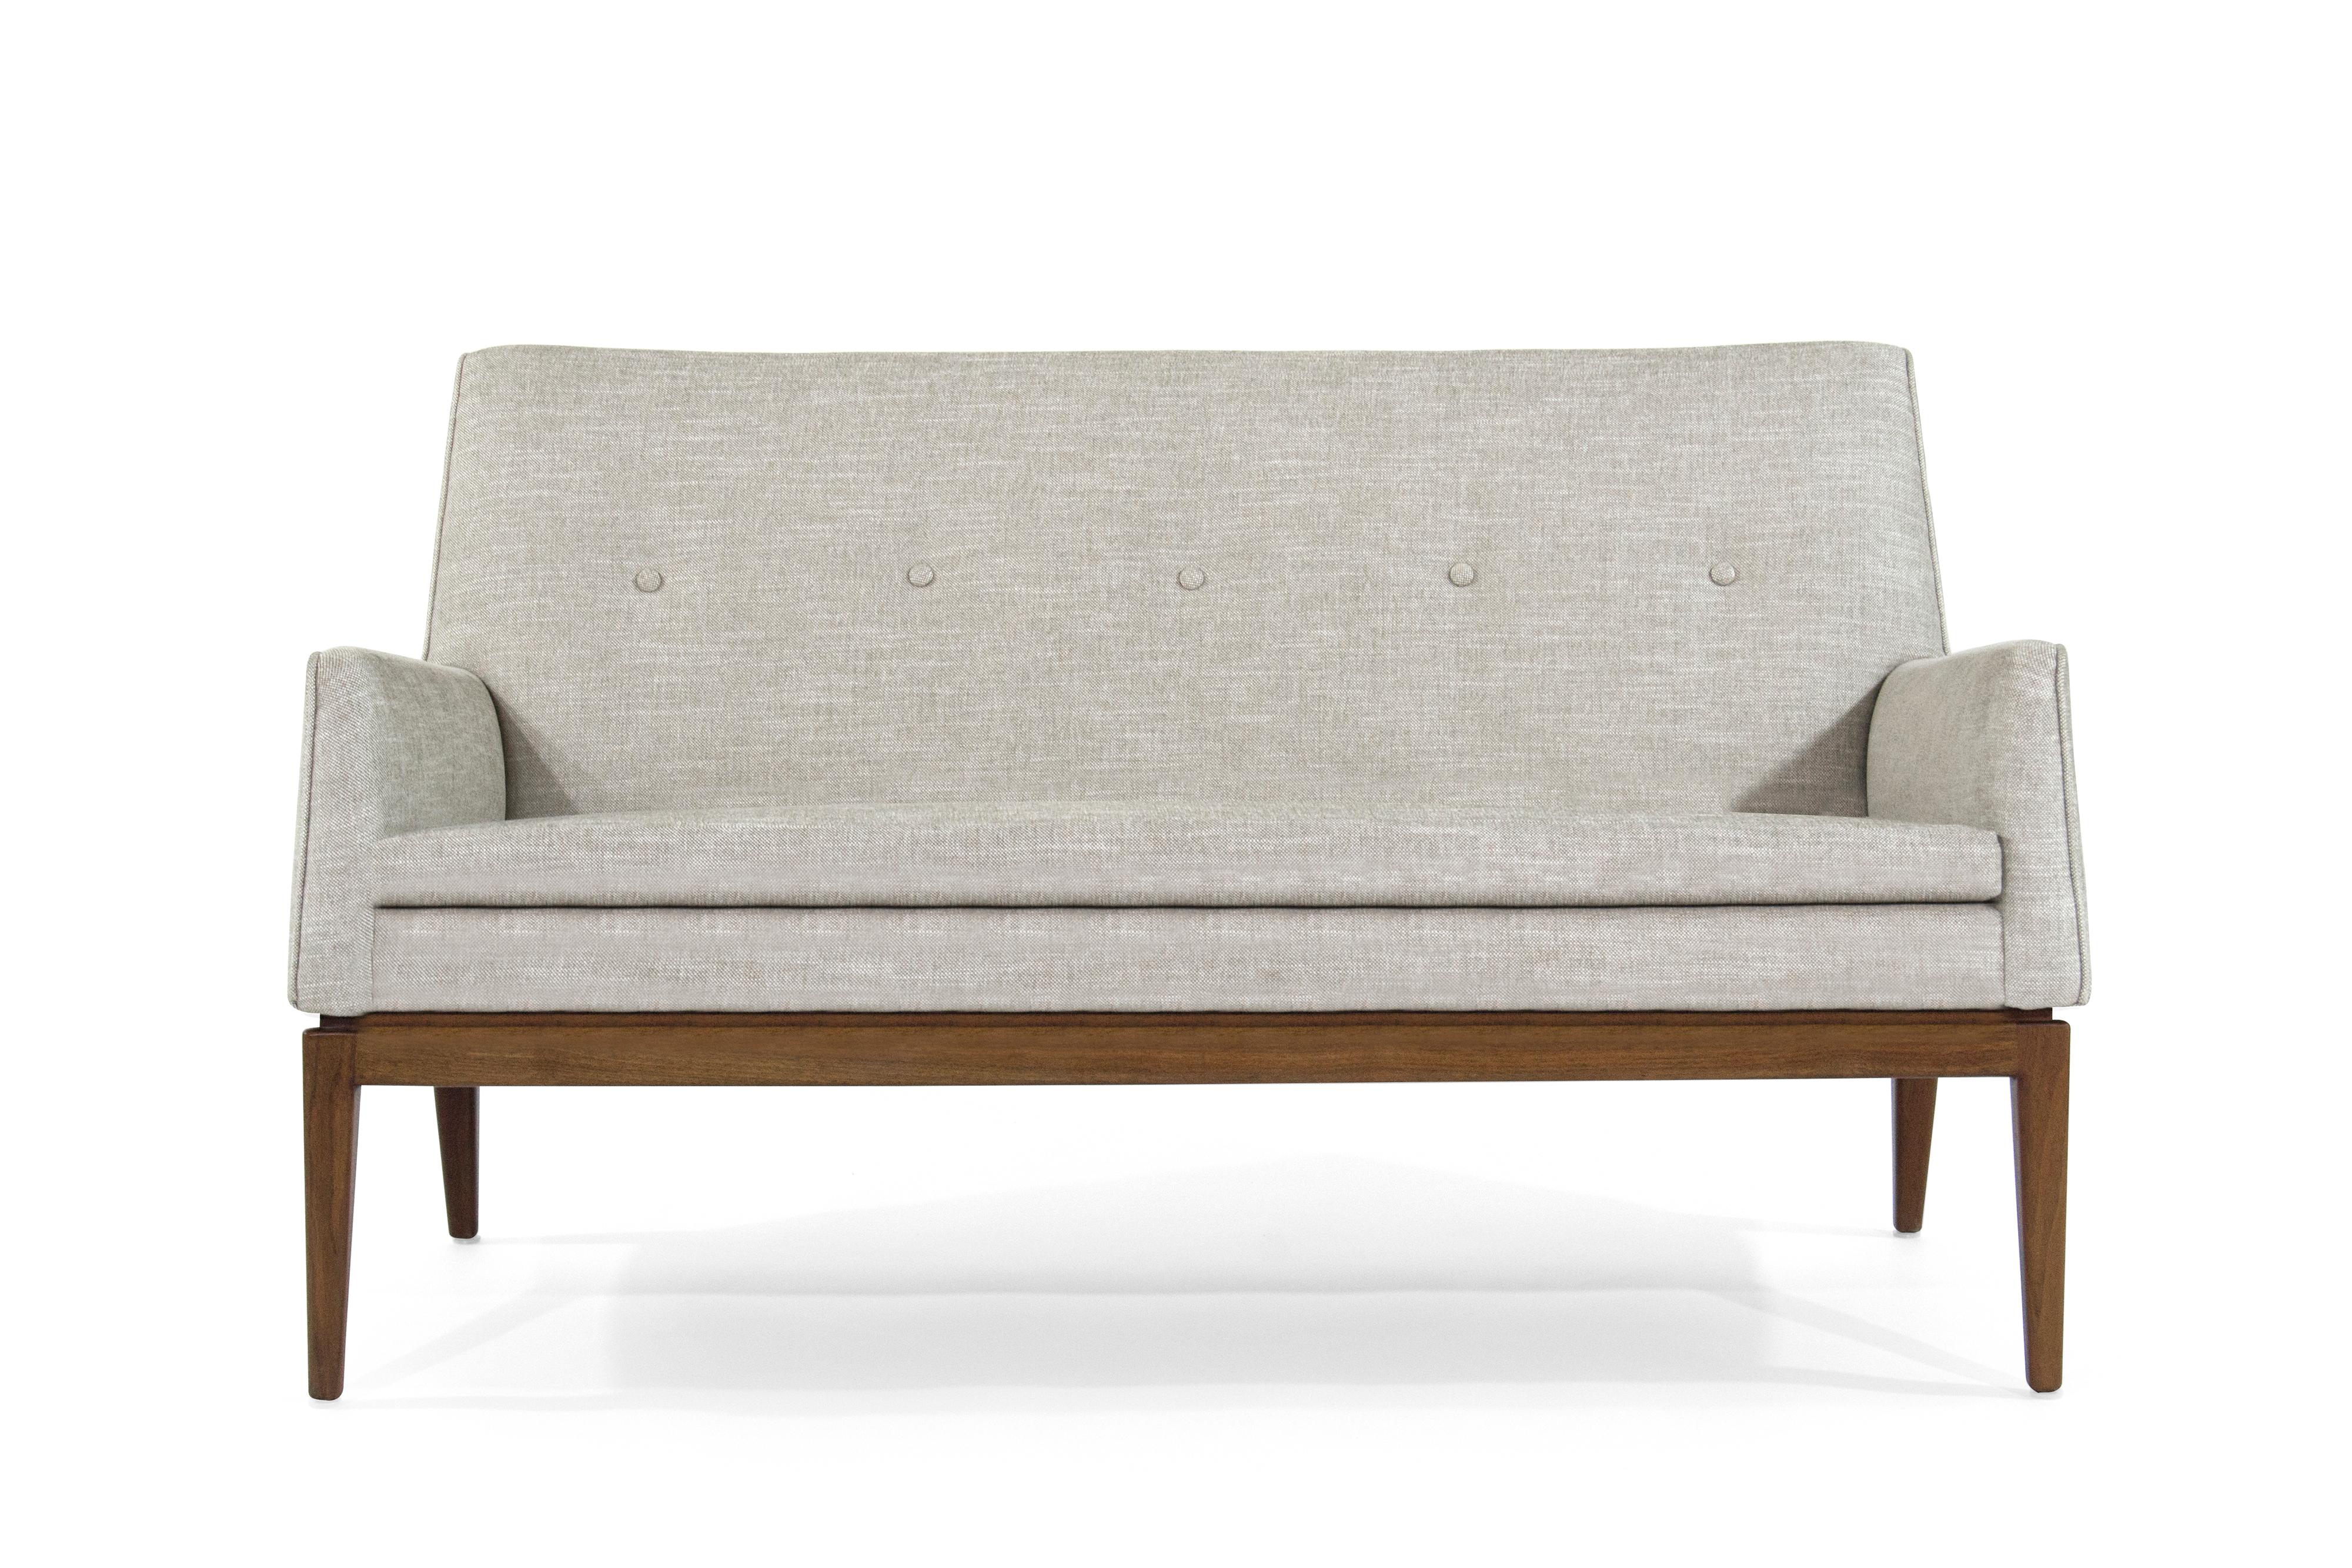 Fully restored loveseat designed by Jens Risom, circa 1950s. Newly upholstered in taupe linen, walnut base fully restored.